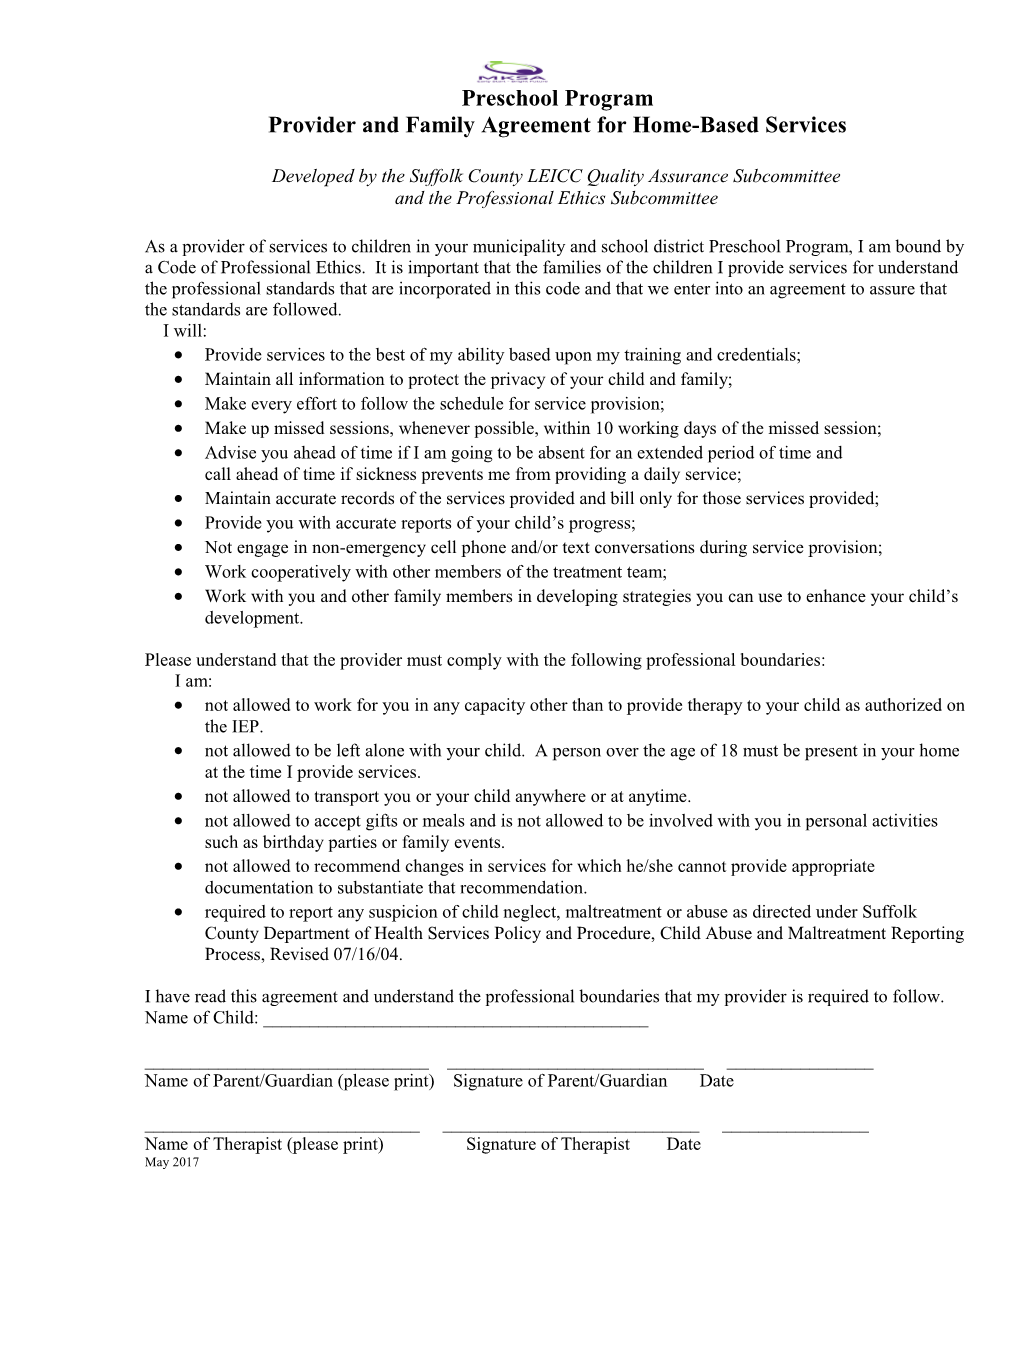 Provider and Family Agreement for Home-Based Services